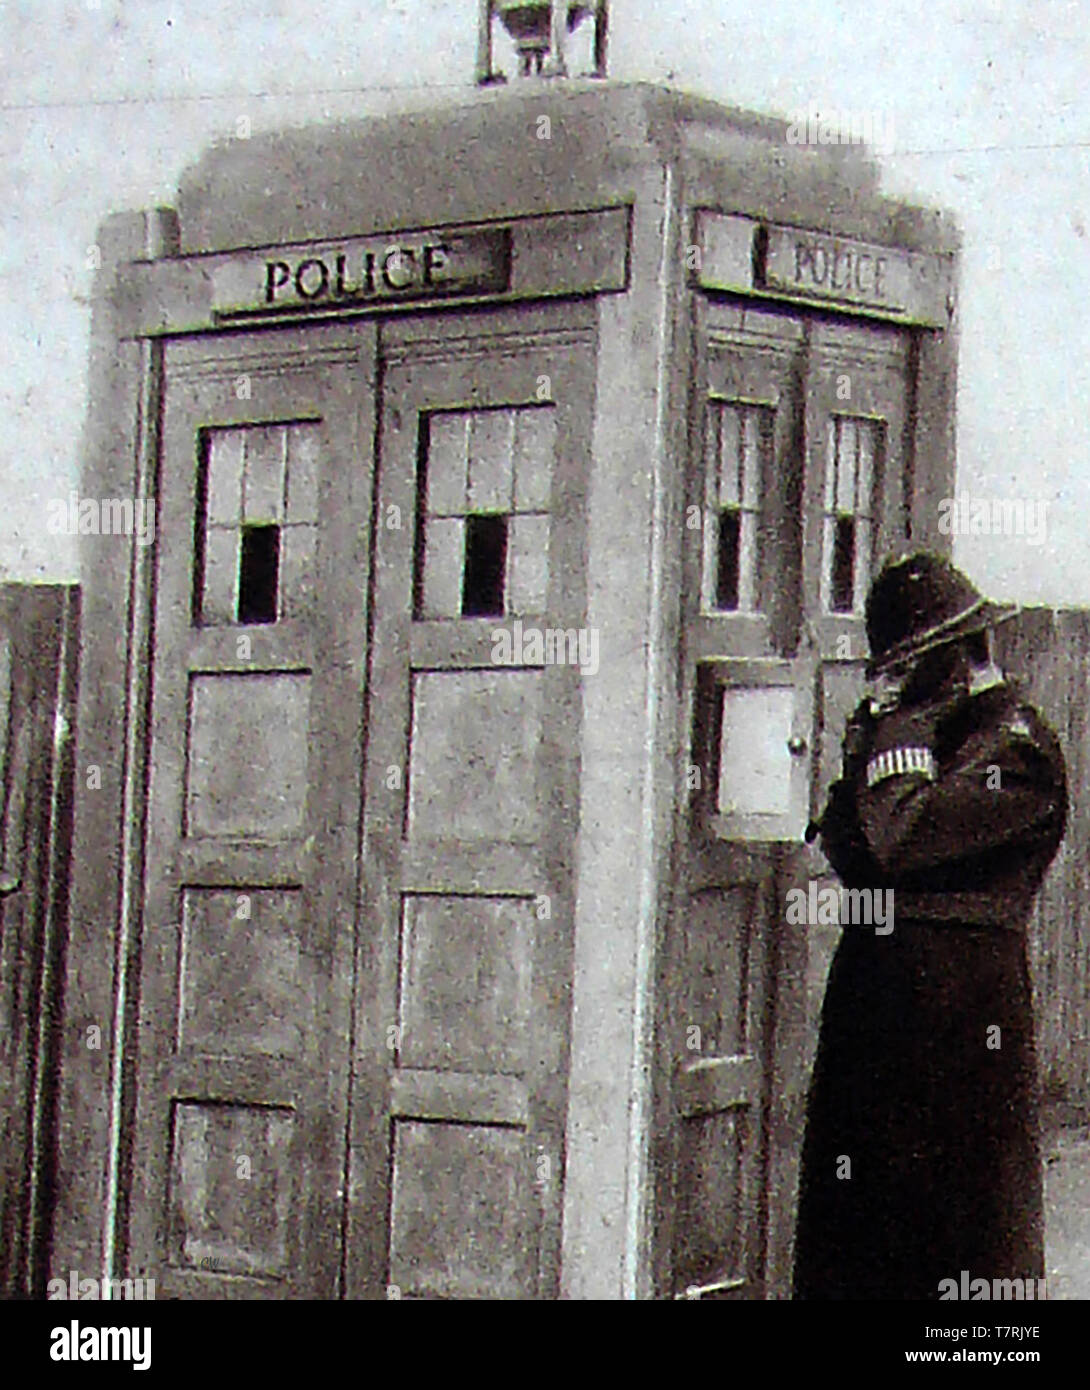 An early Police Box (police telephone box) at Richmond, Surrey, England with a Bobby answering the phone - They were used  by members of the police, or for members of the public to contact the police using the outside accessed phone - Inside the kiosk was a miniature police station containing an incident book, fire extinguisher and first aid kit Stock Photo